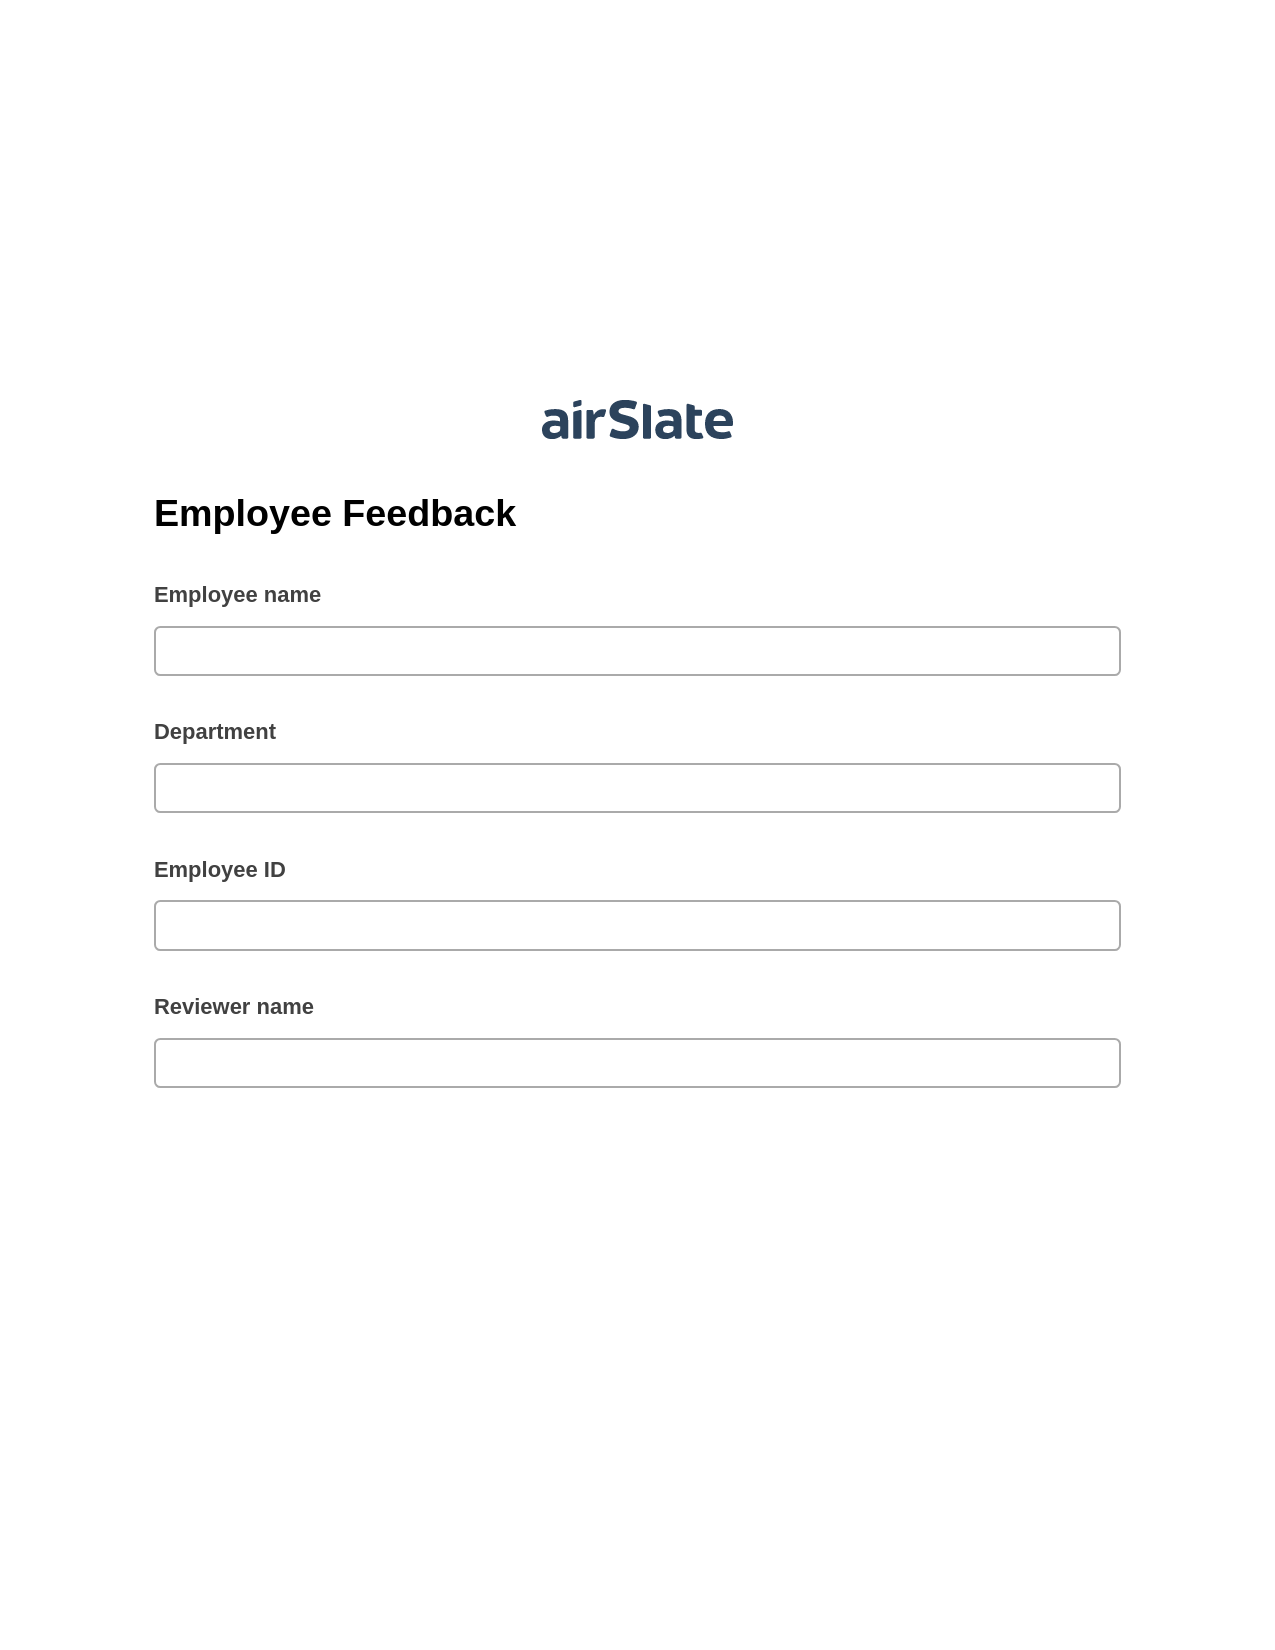 Multirole Employee Feedback Pre-fill from Salesforce Records with SOQL Bot, Unassign Role Bot, Export to Excel 365 Bot